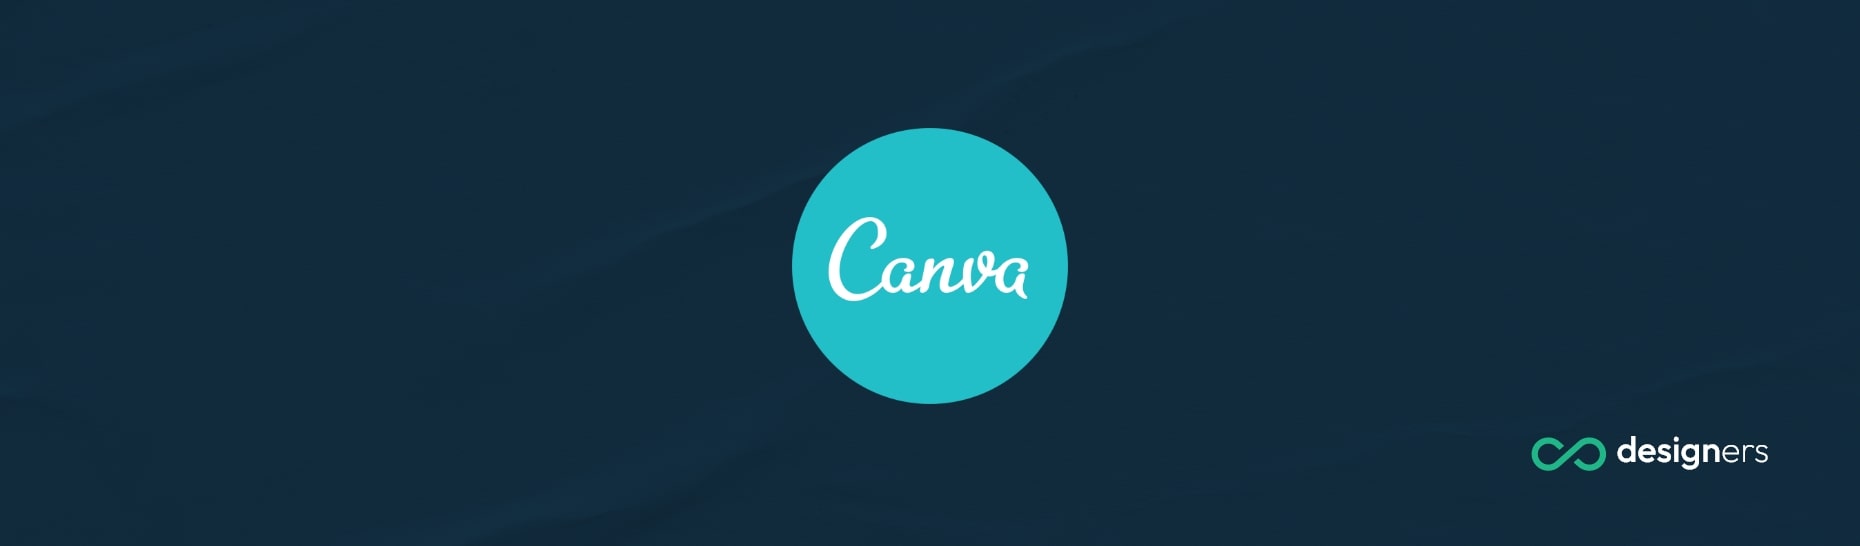 What Font Is Futura in Canva?